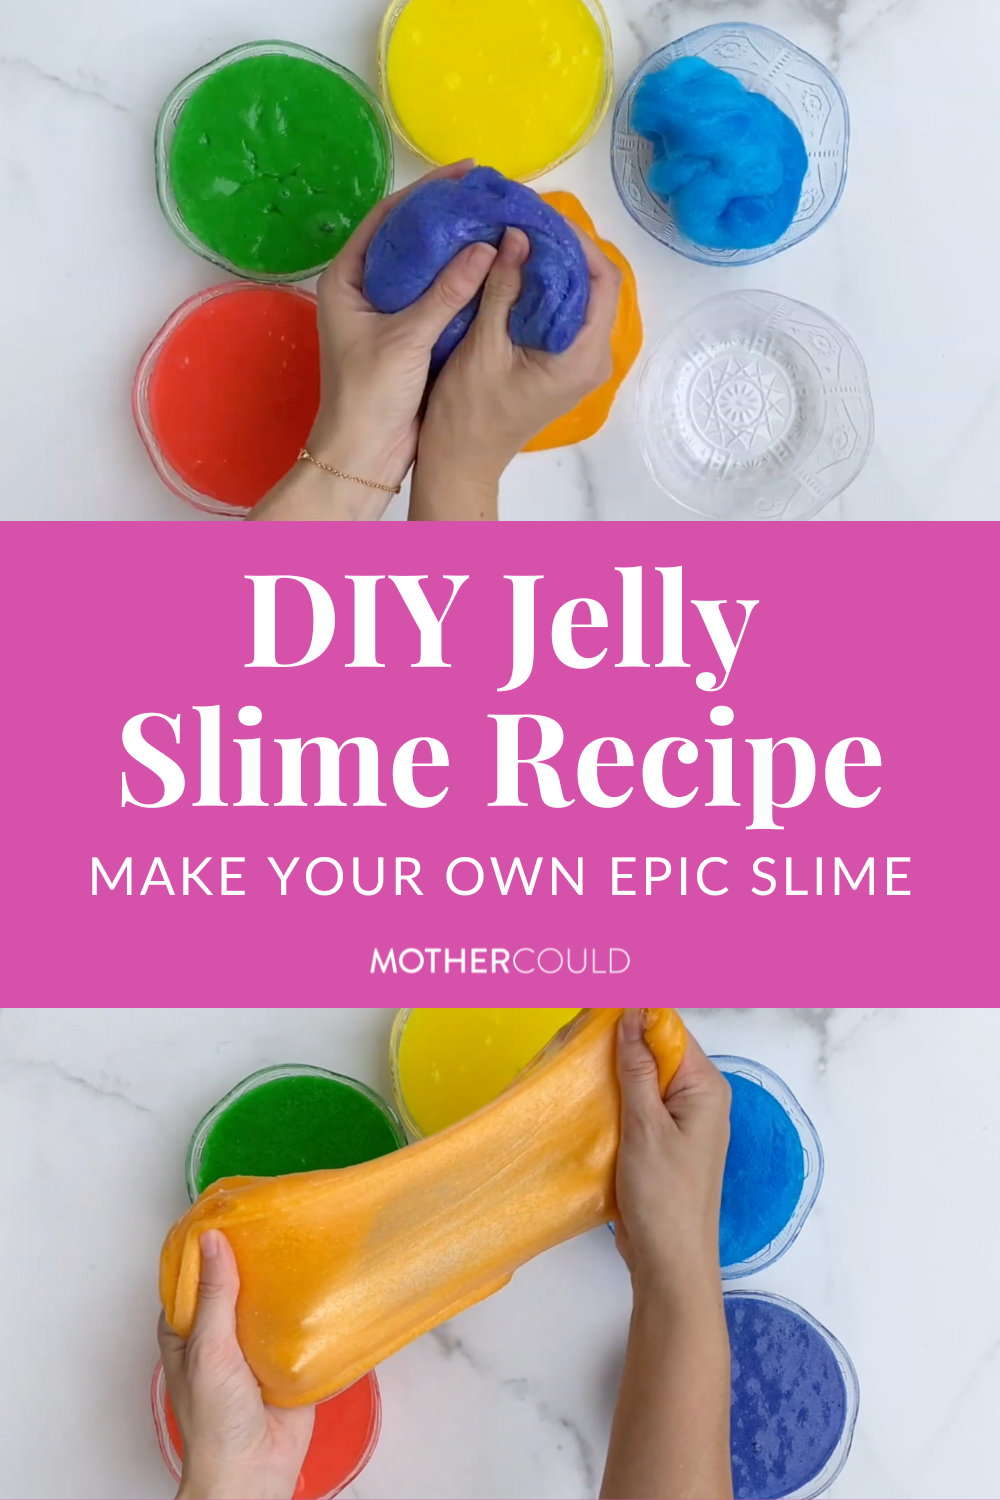 Easy Cloud Slime Recipe - Mess for Less